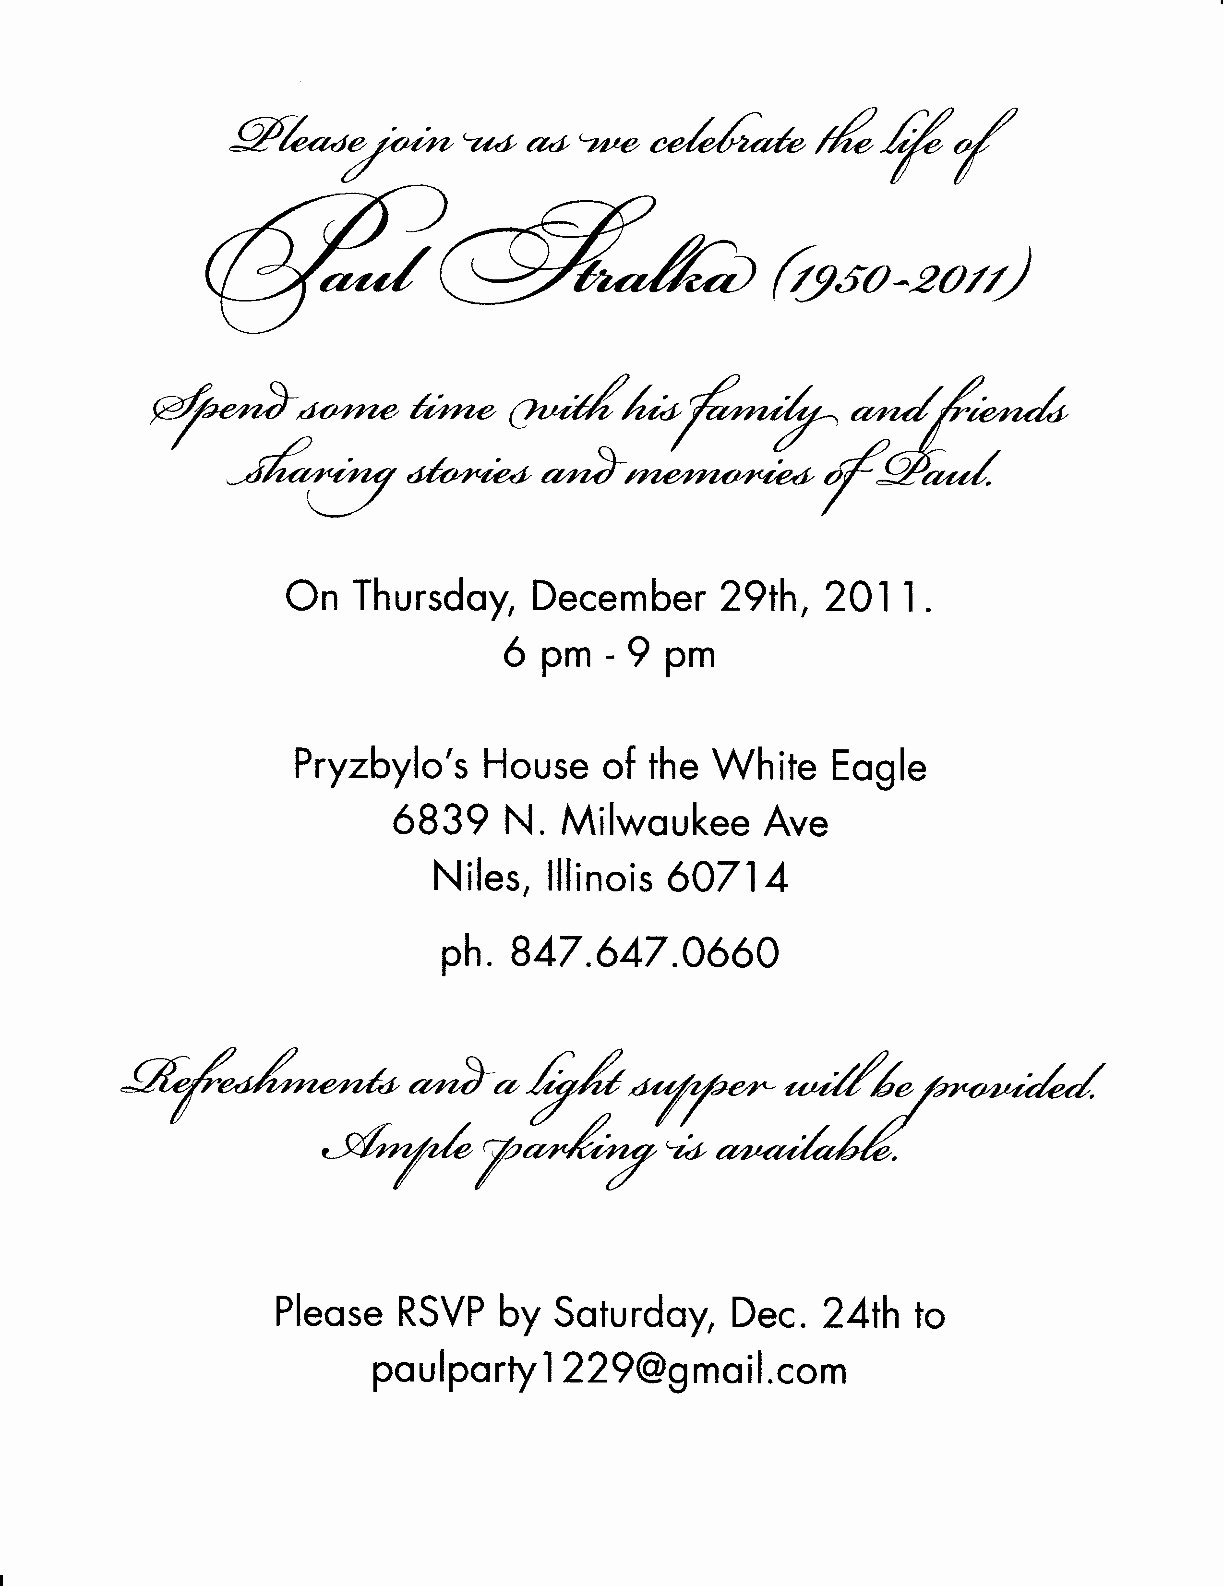 Party Invitation Email Template Unique Email Party Invitations Email Party Invitations with some